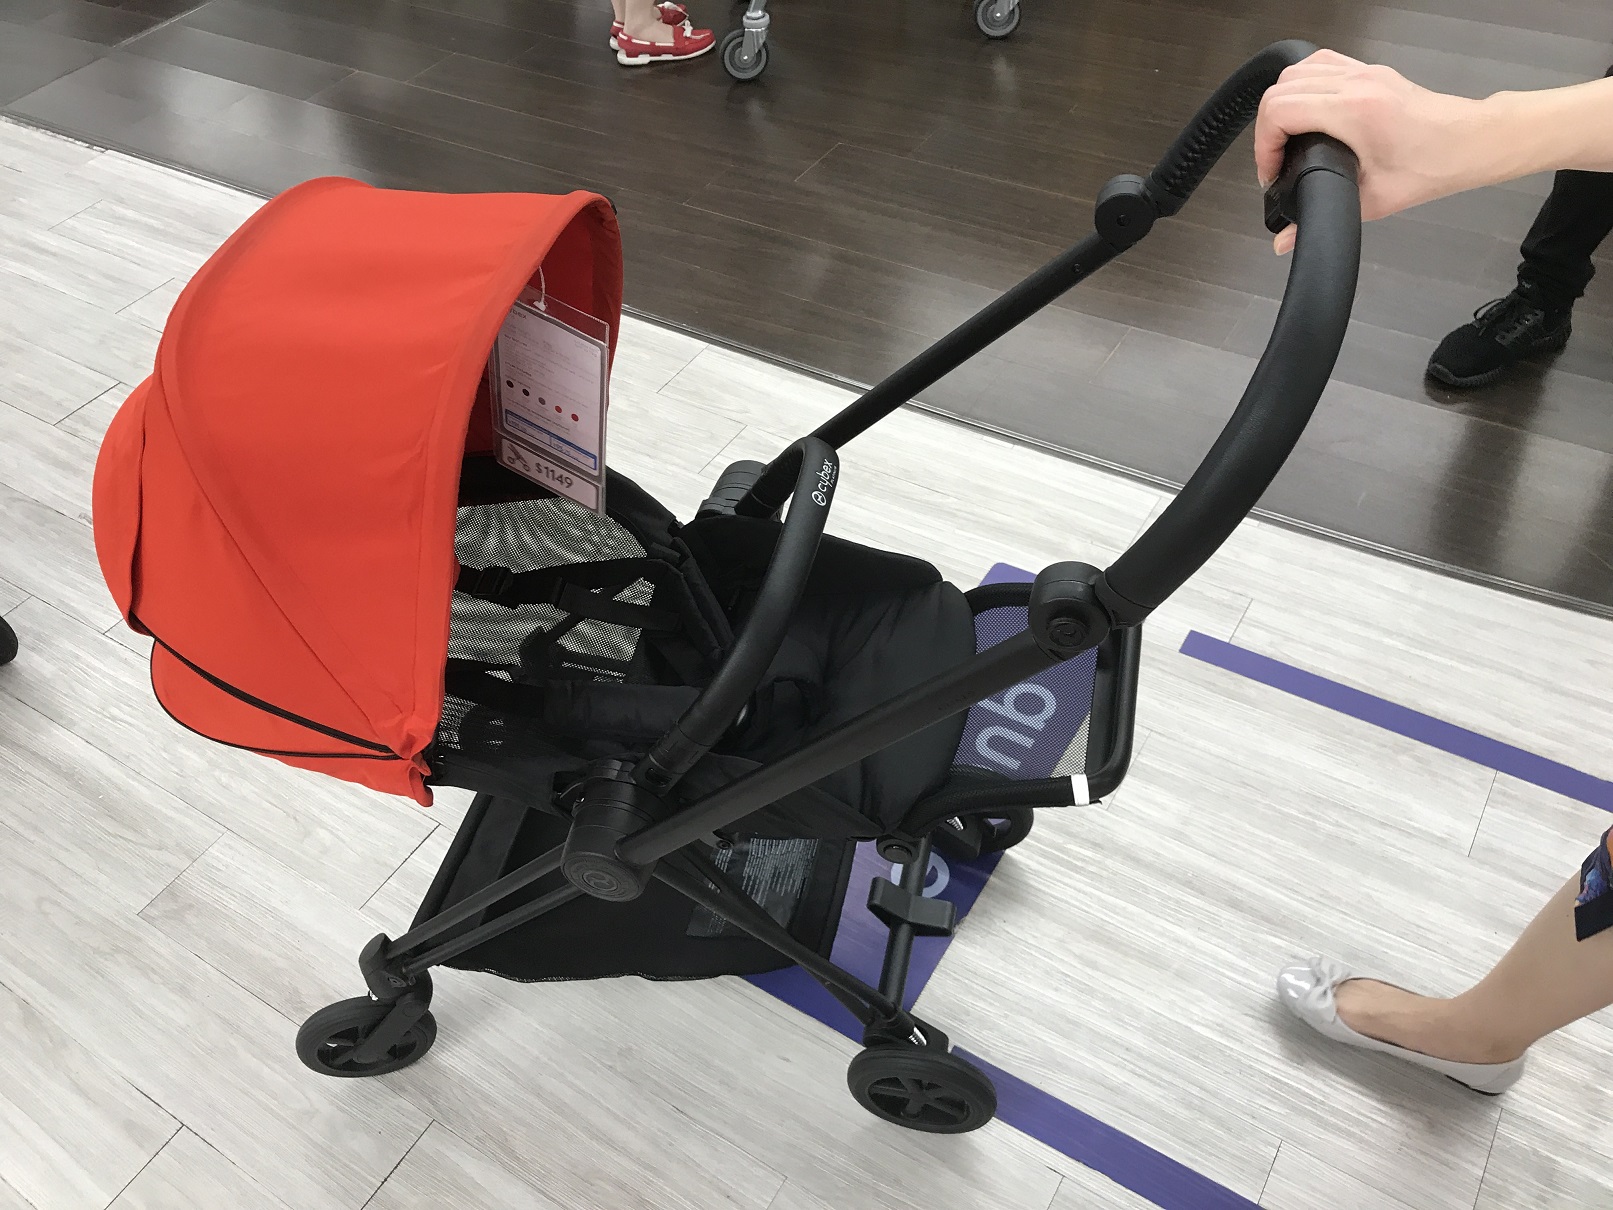 Should be getting this Cybex Mios stroller. But still have some time to think about it...